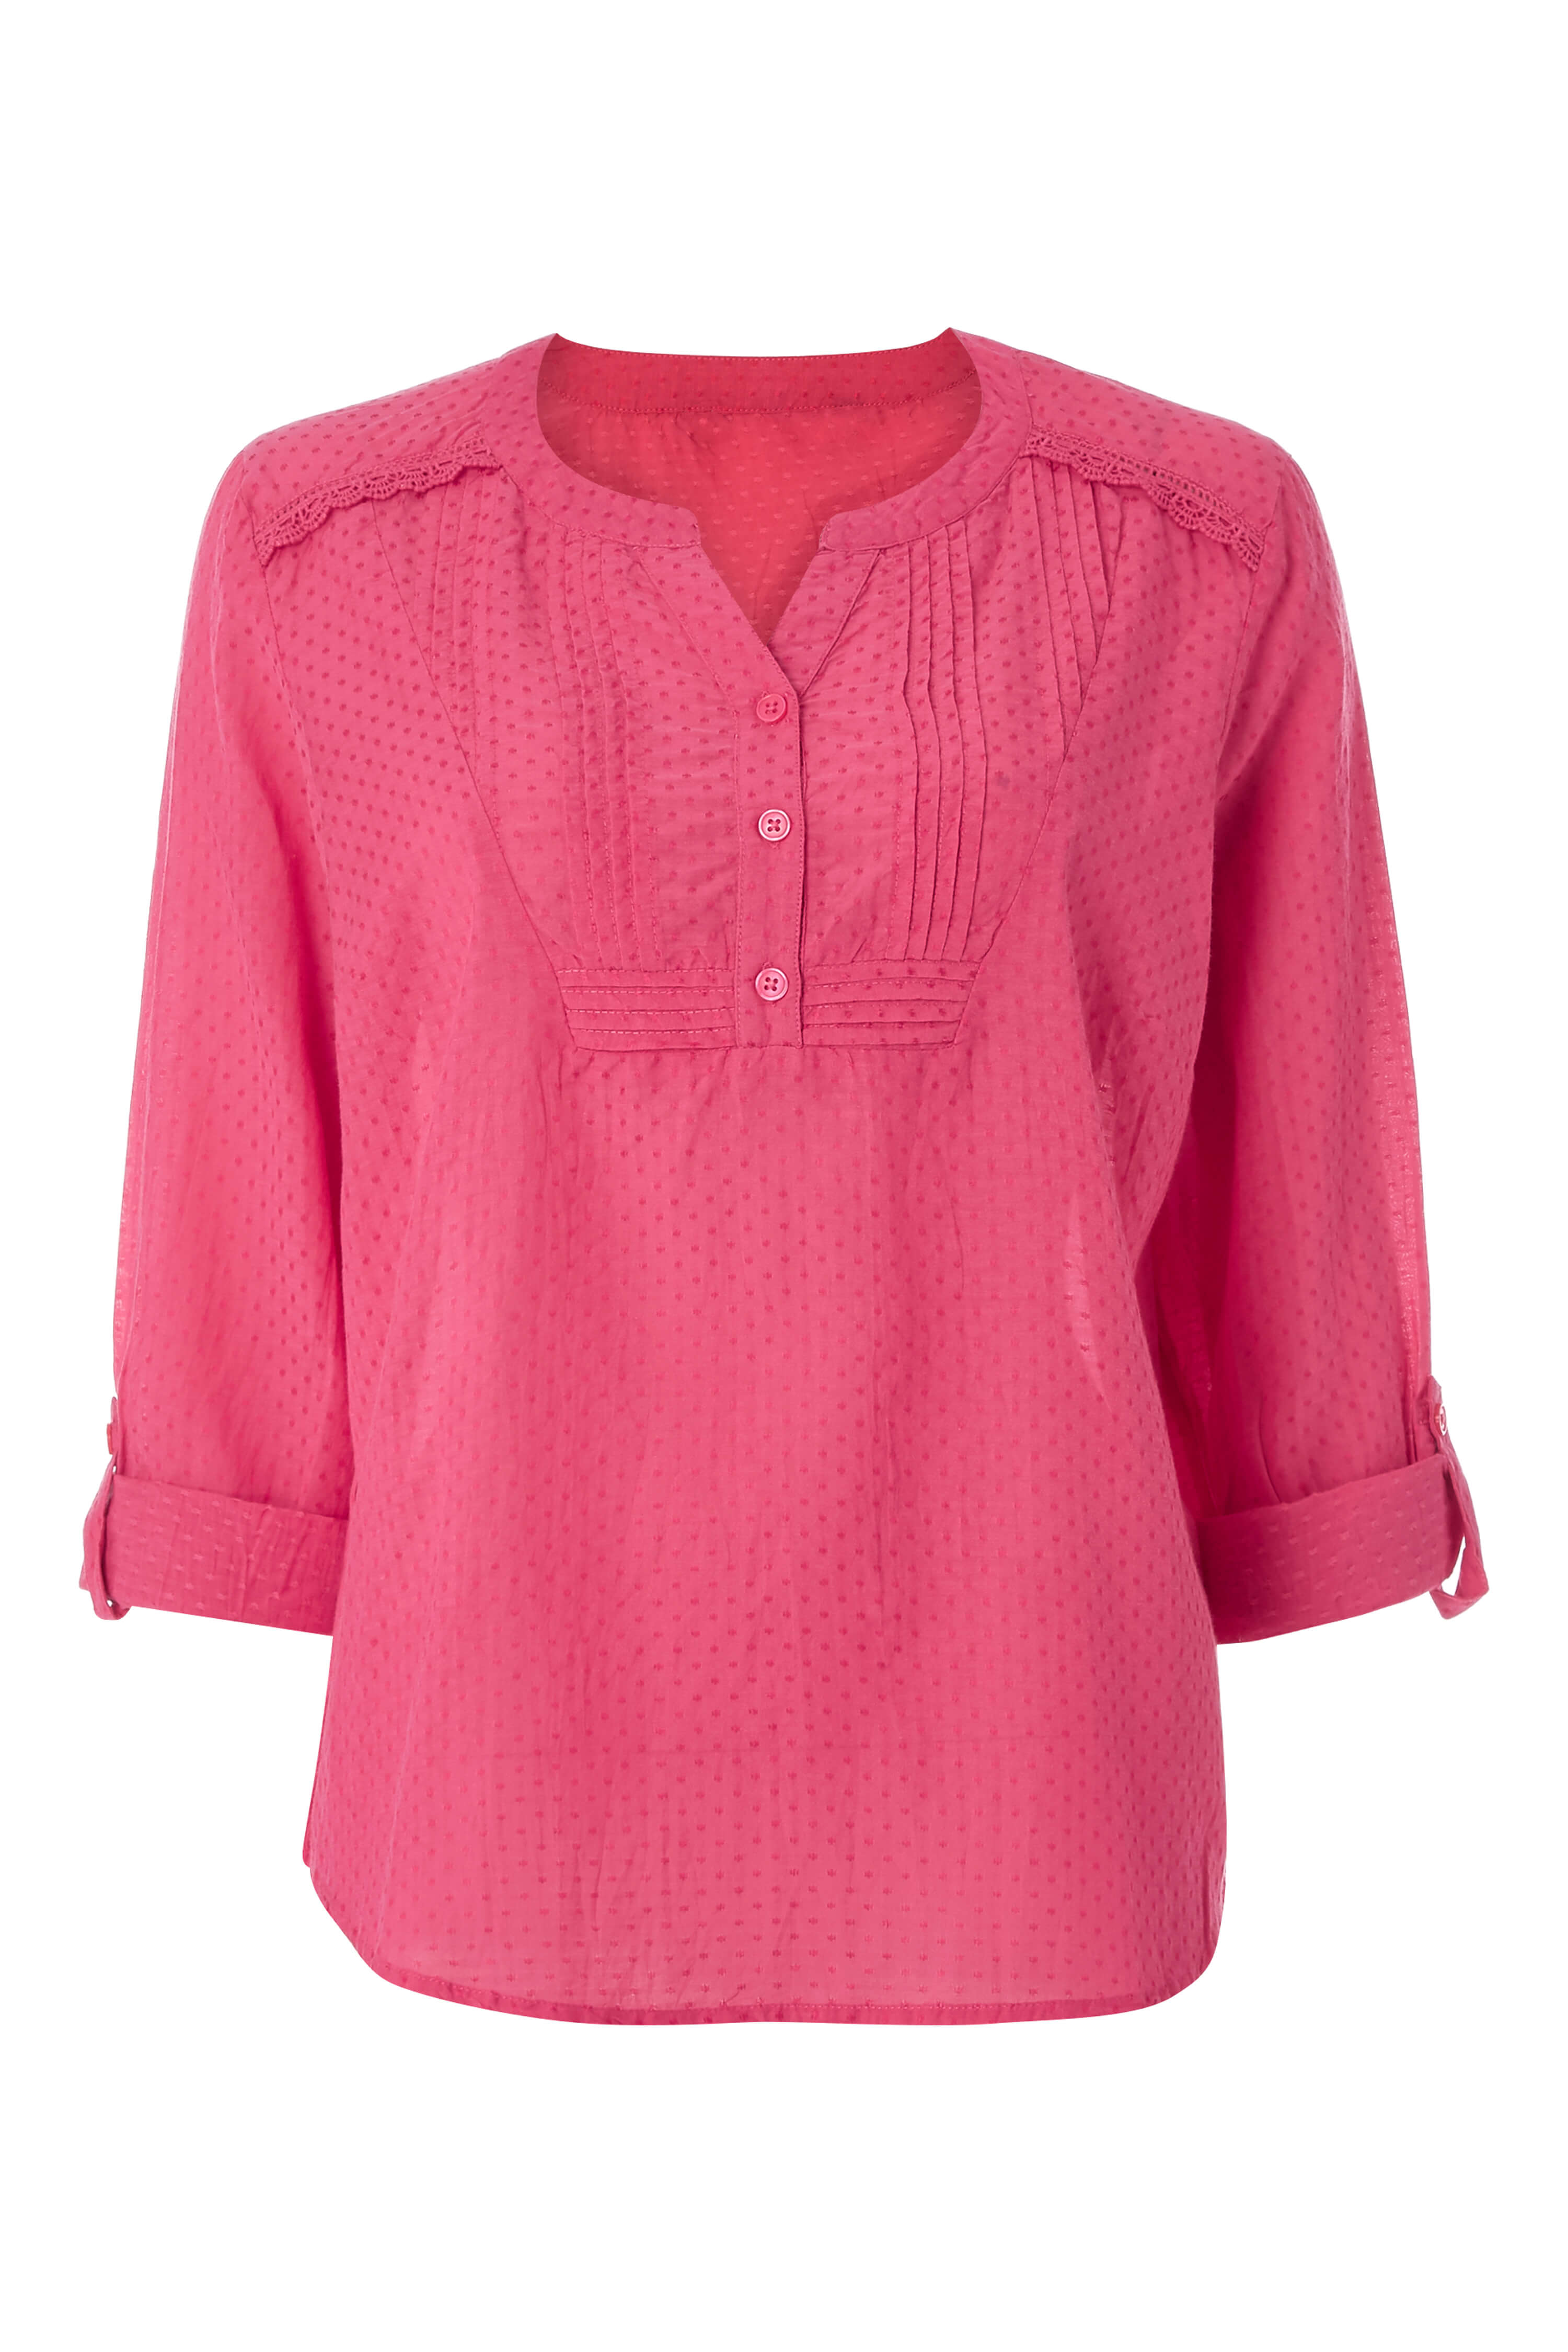 PINK Roll Sleeve Cotton Top, Image 4 of 4